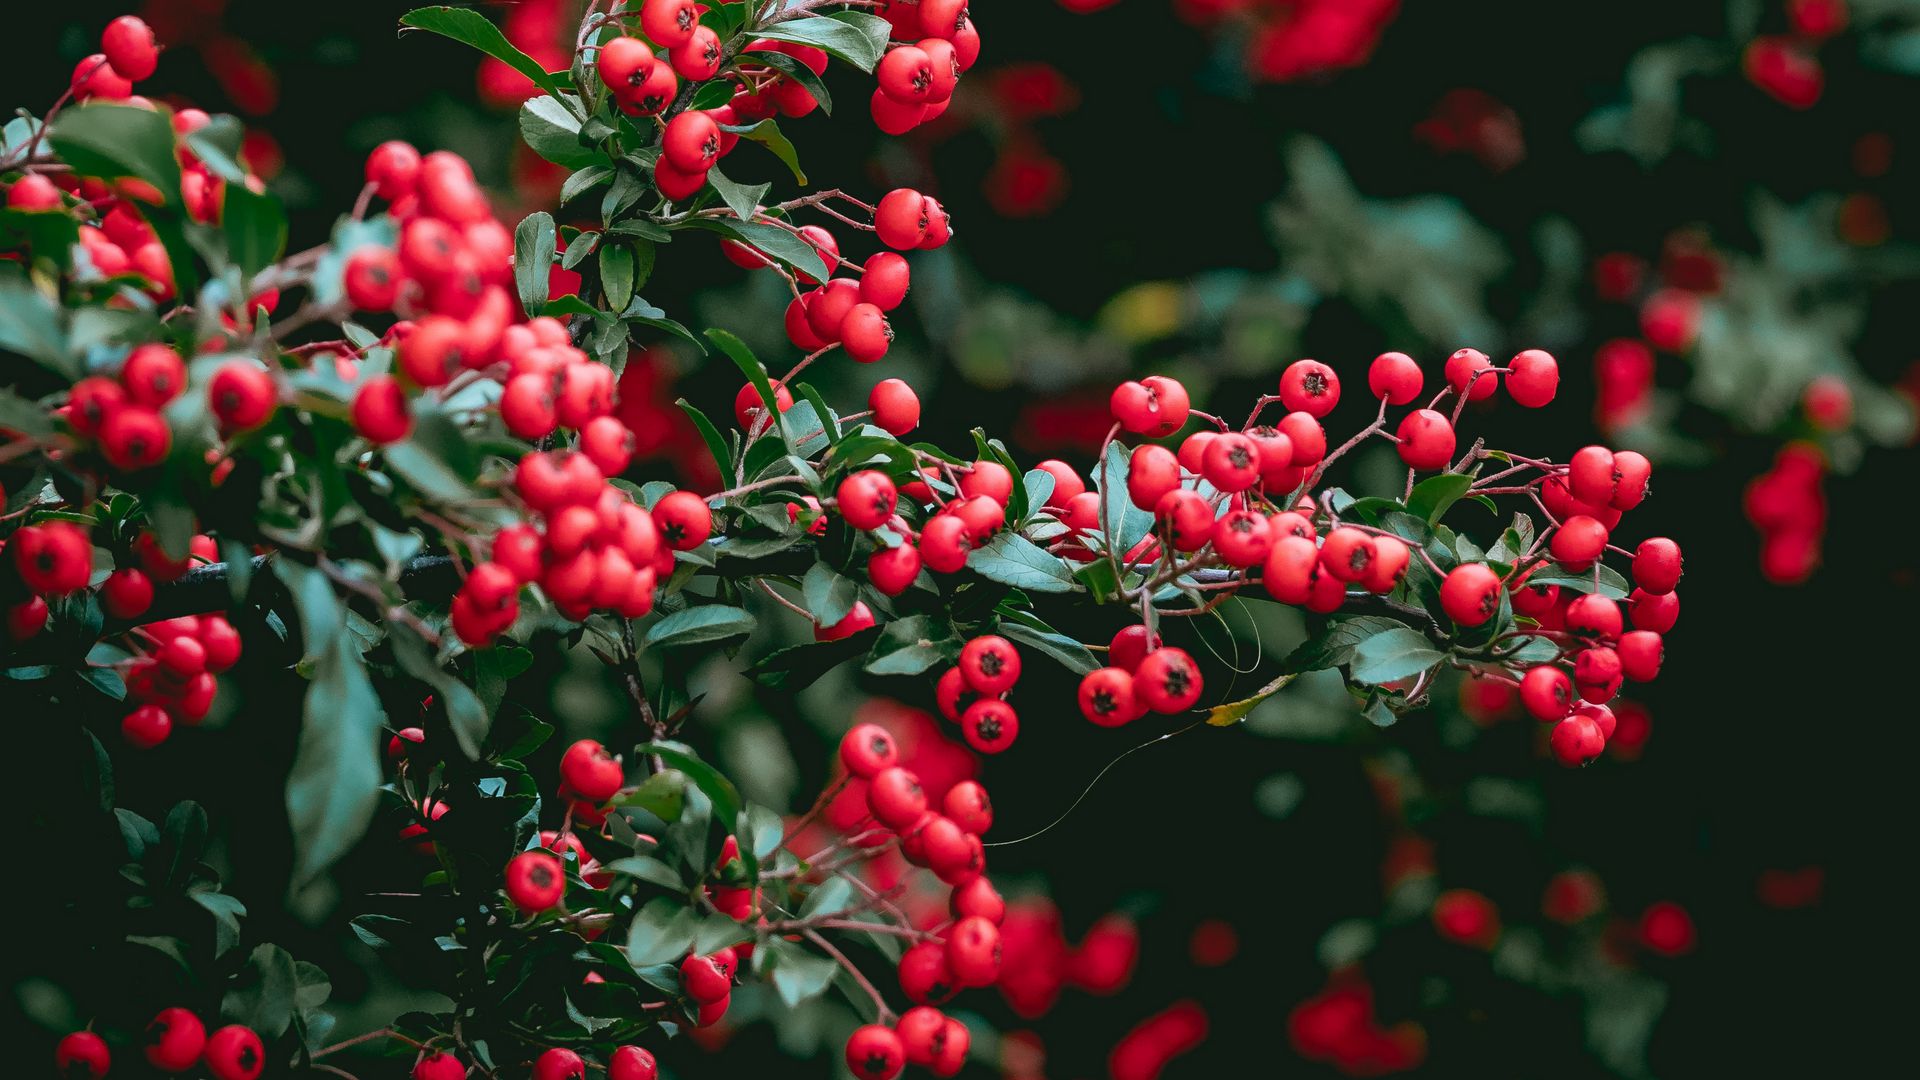 Download wallpaper 1920x1080 berries, red berries, leaves, branches full hd, hdtv, fhd, 1080p HD background